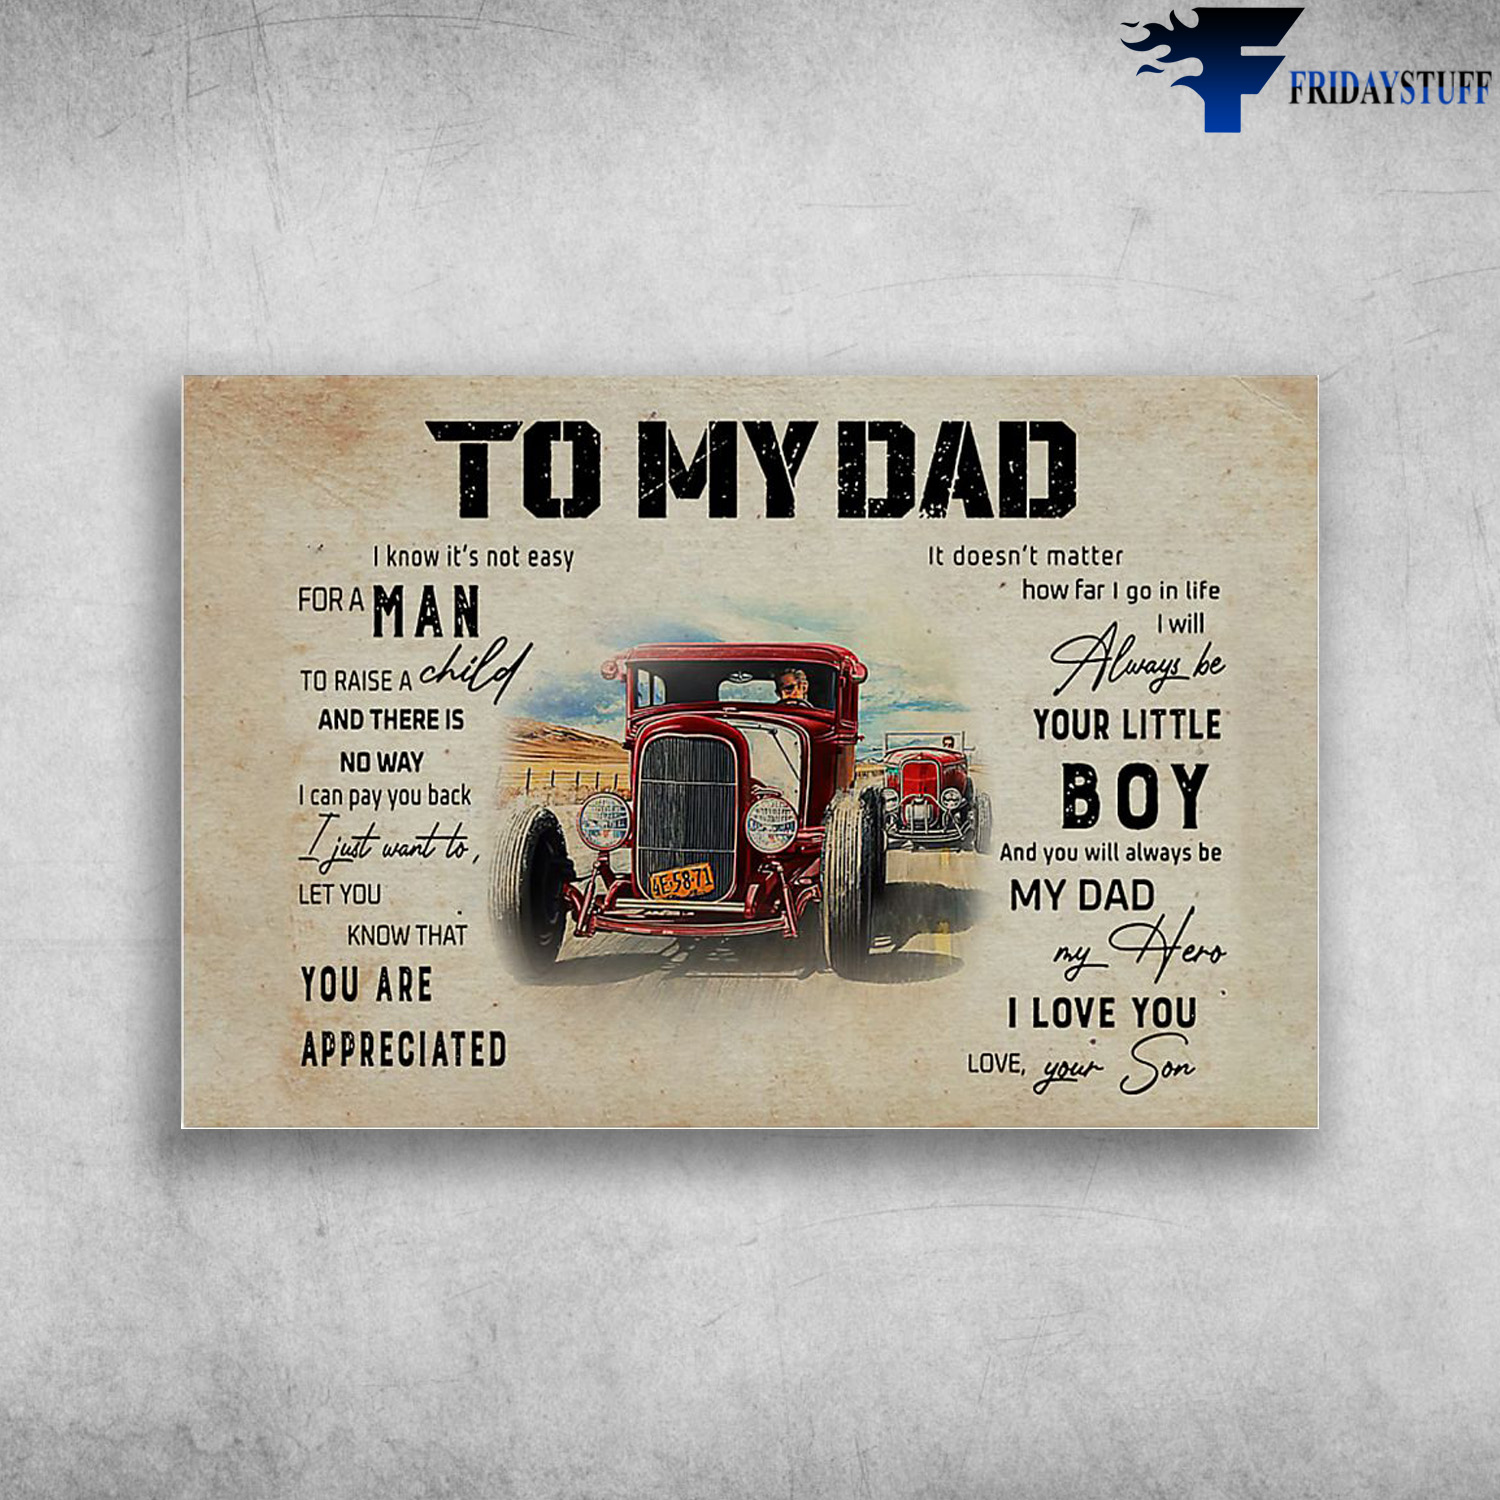 To My Dad - Man Drive Hot Rod, I Know It's Not Easy For A Man To Raise A Child